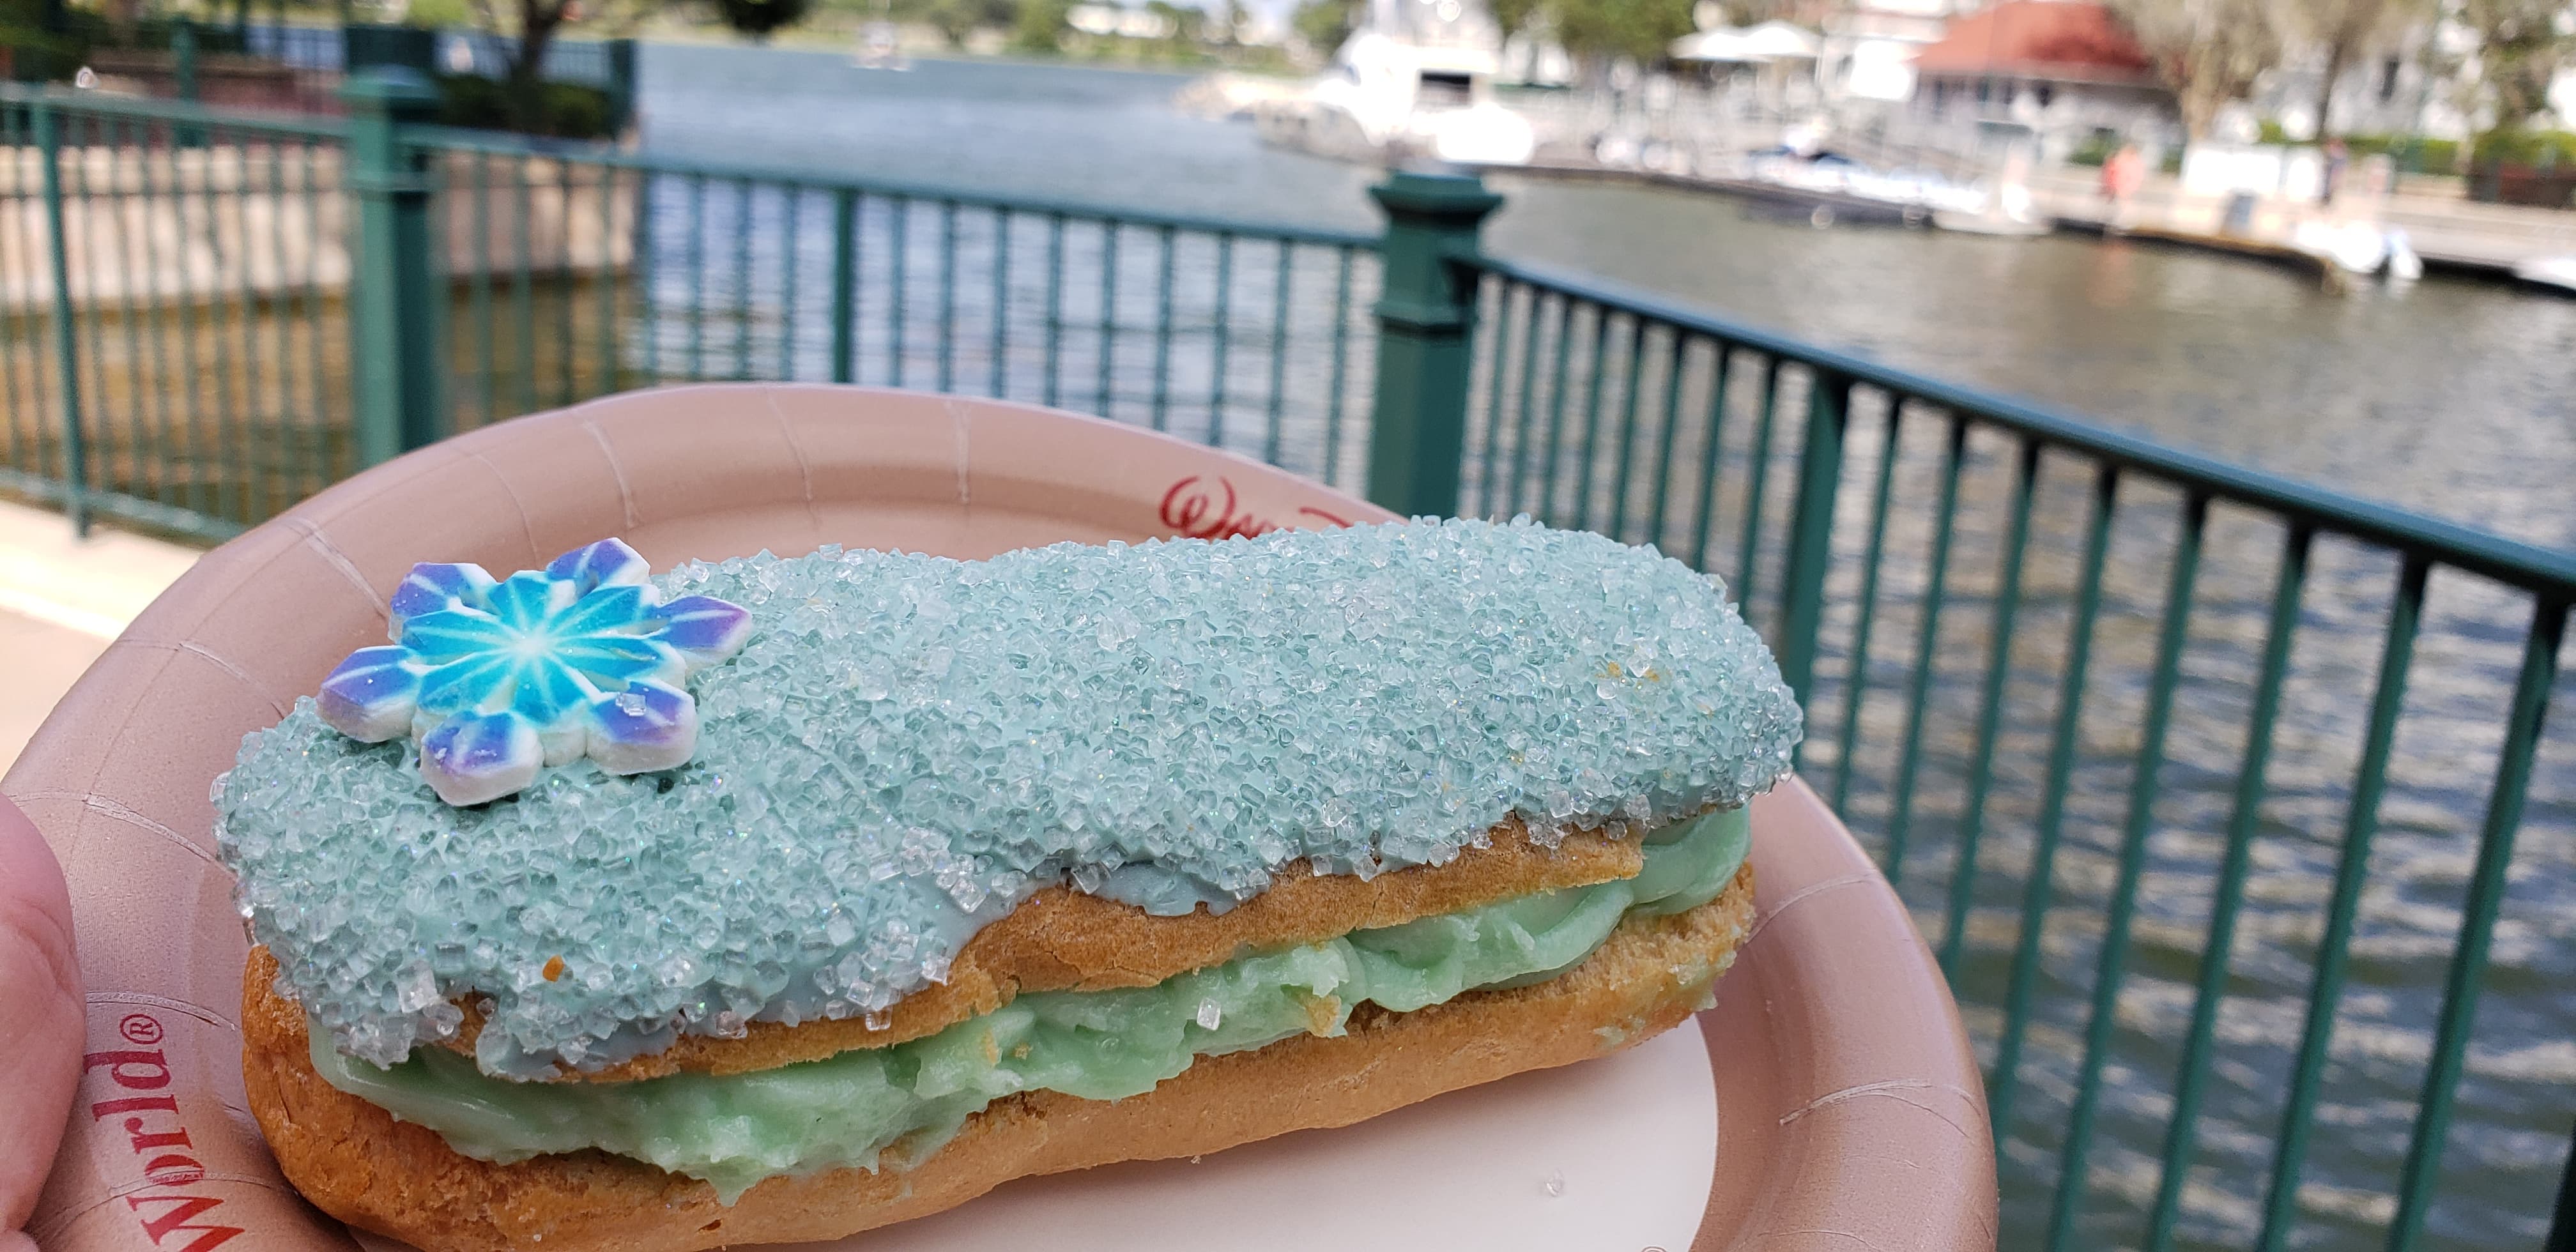 The Disney Arendelle Aqua Trend Continues with a Cotton Candy Eclair